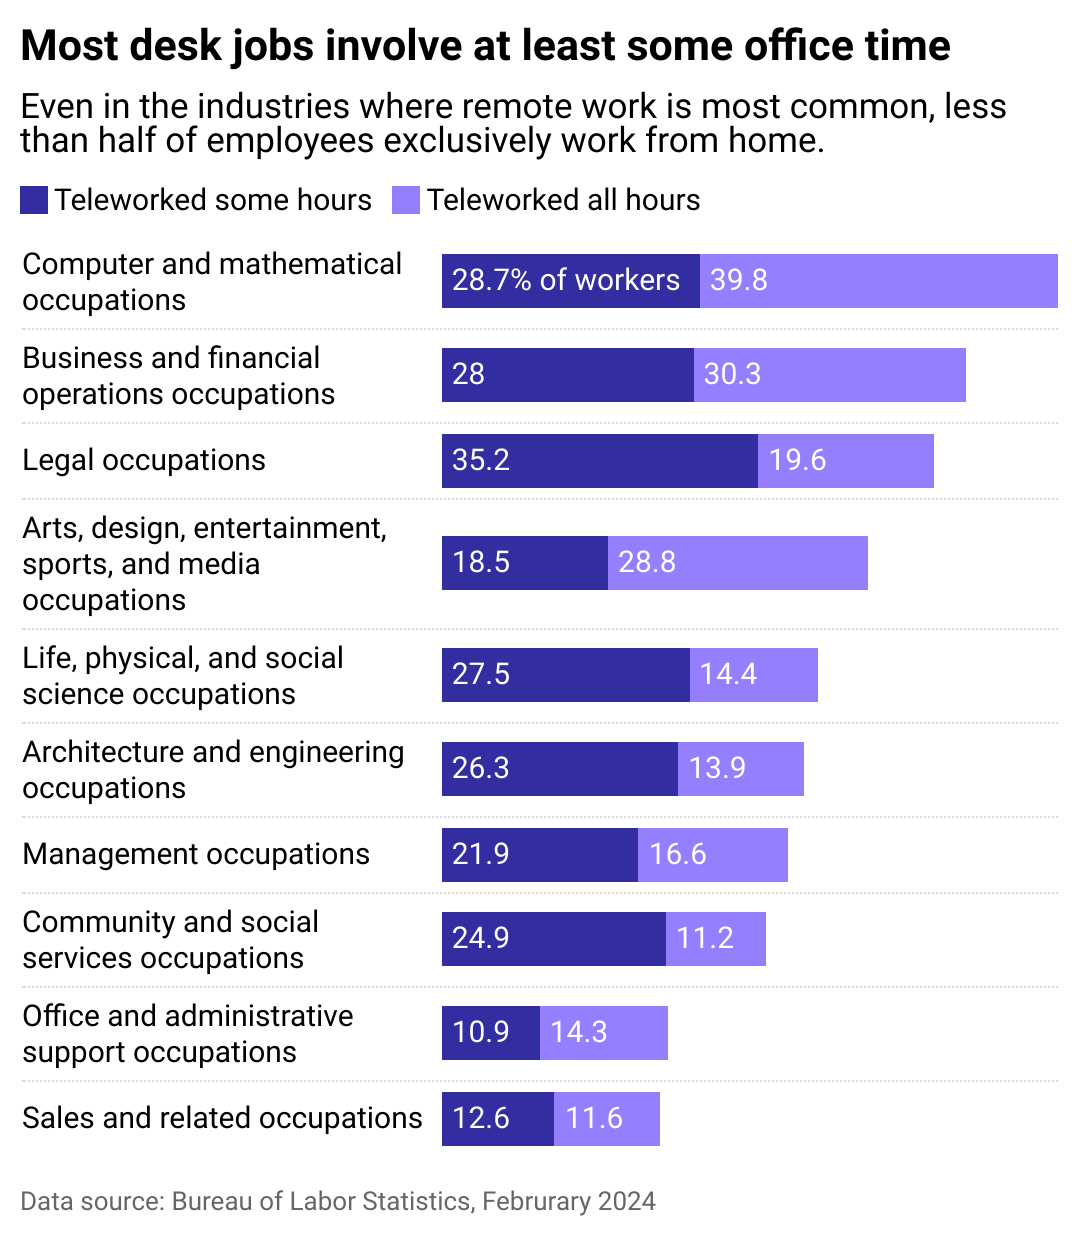 Stacked bar chart showing the 10 occupations with the highest share of employees working at home for at least some of the week. Computer and mathematical occupations top the list followed by financial and business operations jobs. Still, even in the industries where remote work is most prominent, less than half of employees exclusively work from home.